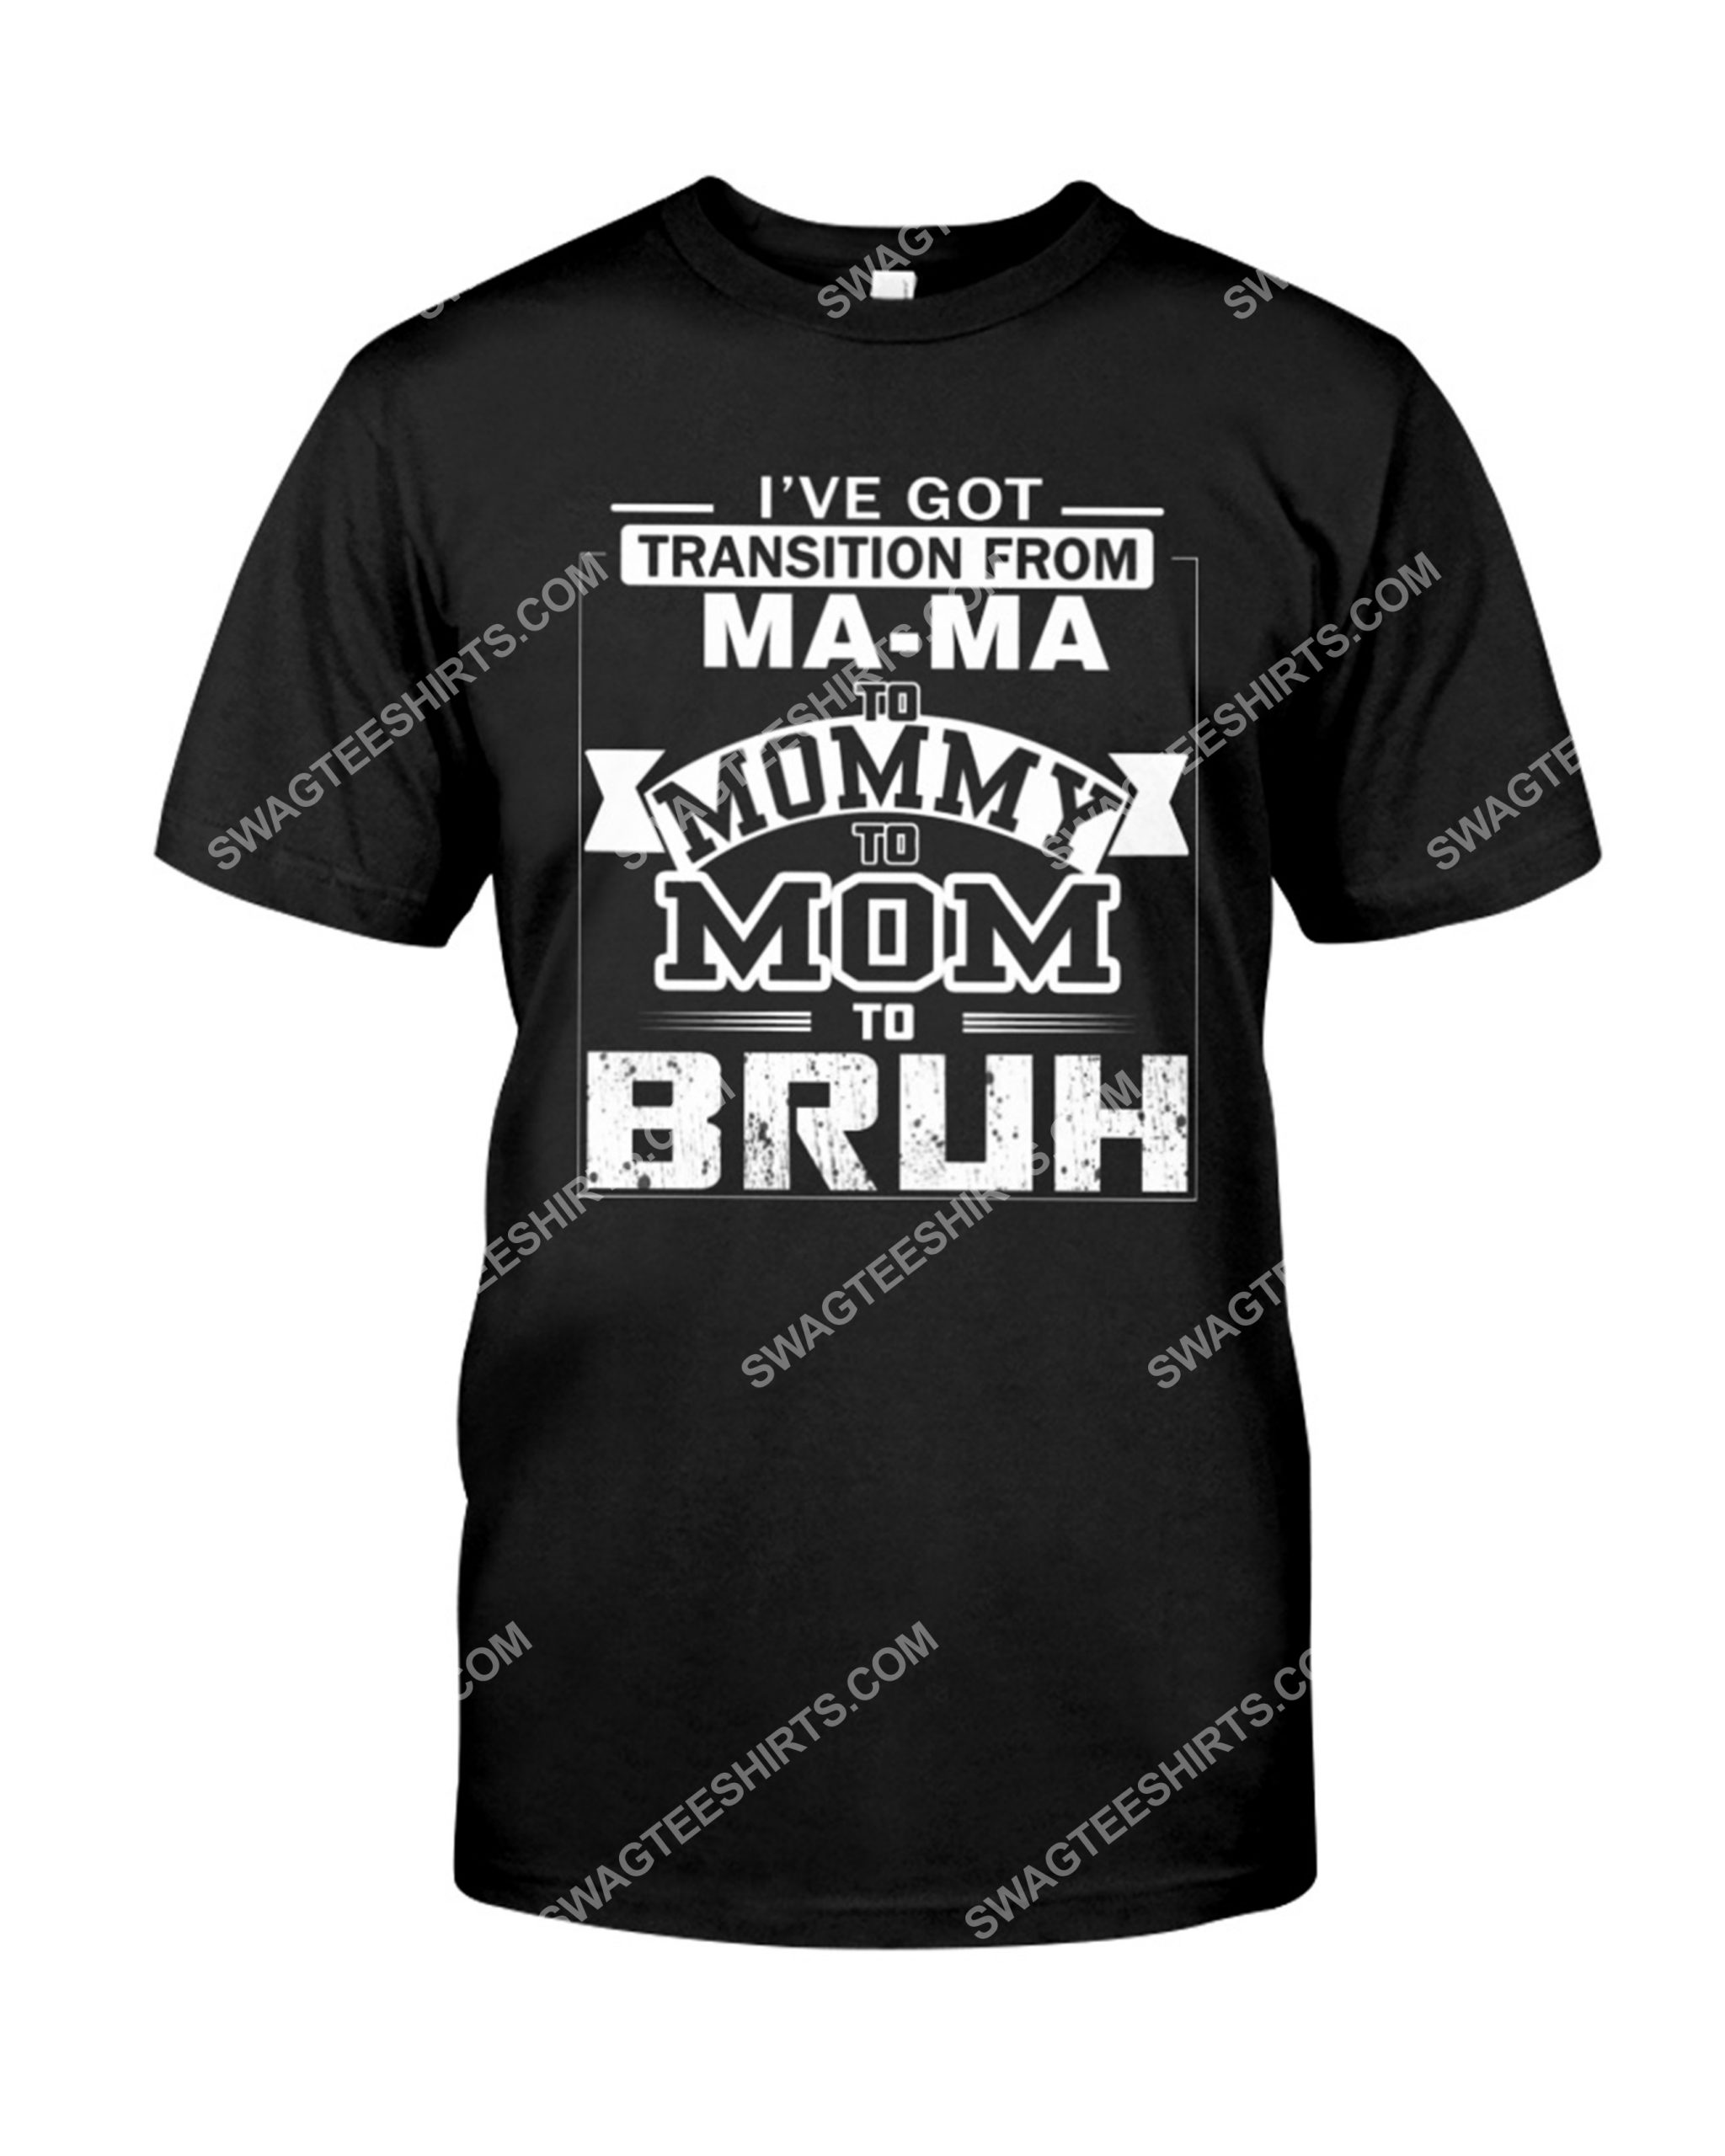 i've got transition from ma-ma to mommy to mom to bruh shirt 1(1)